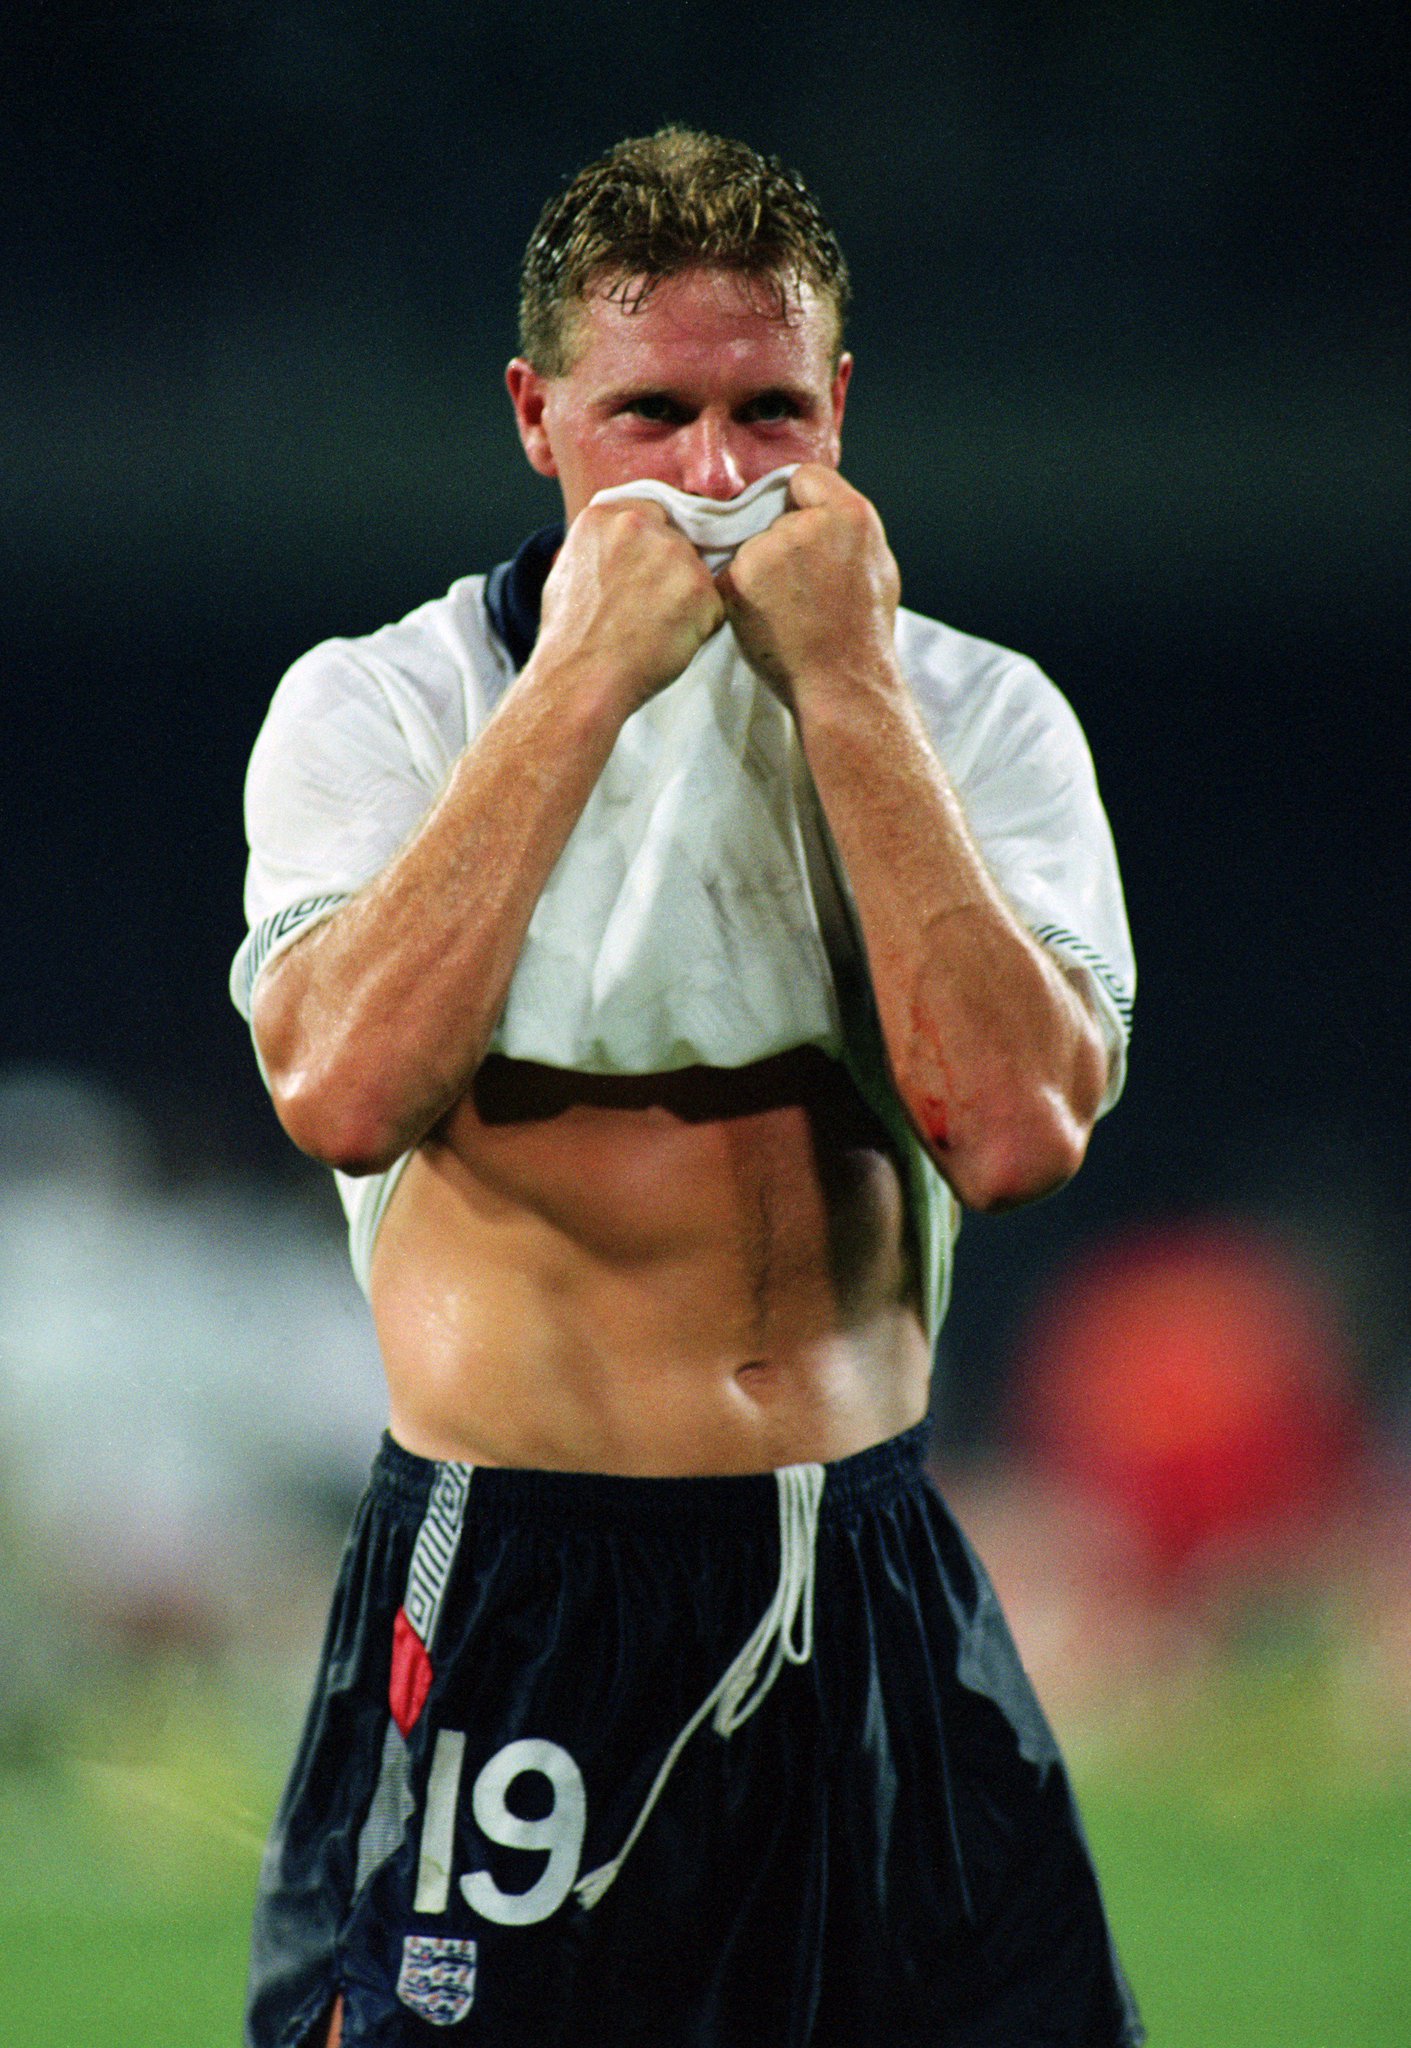 Happy 50th Birthday to one of the finest talents to come out of the British Isles: Paul Gascoigne! 